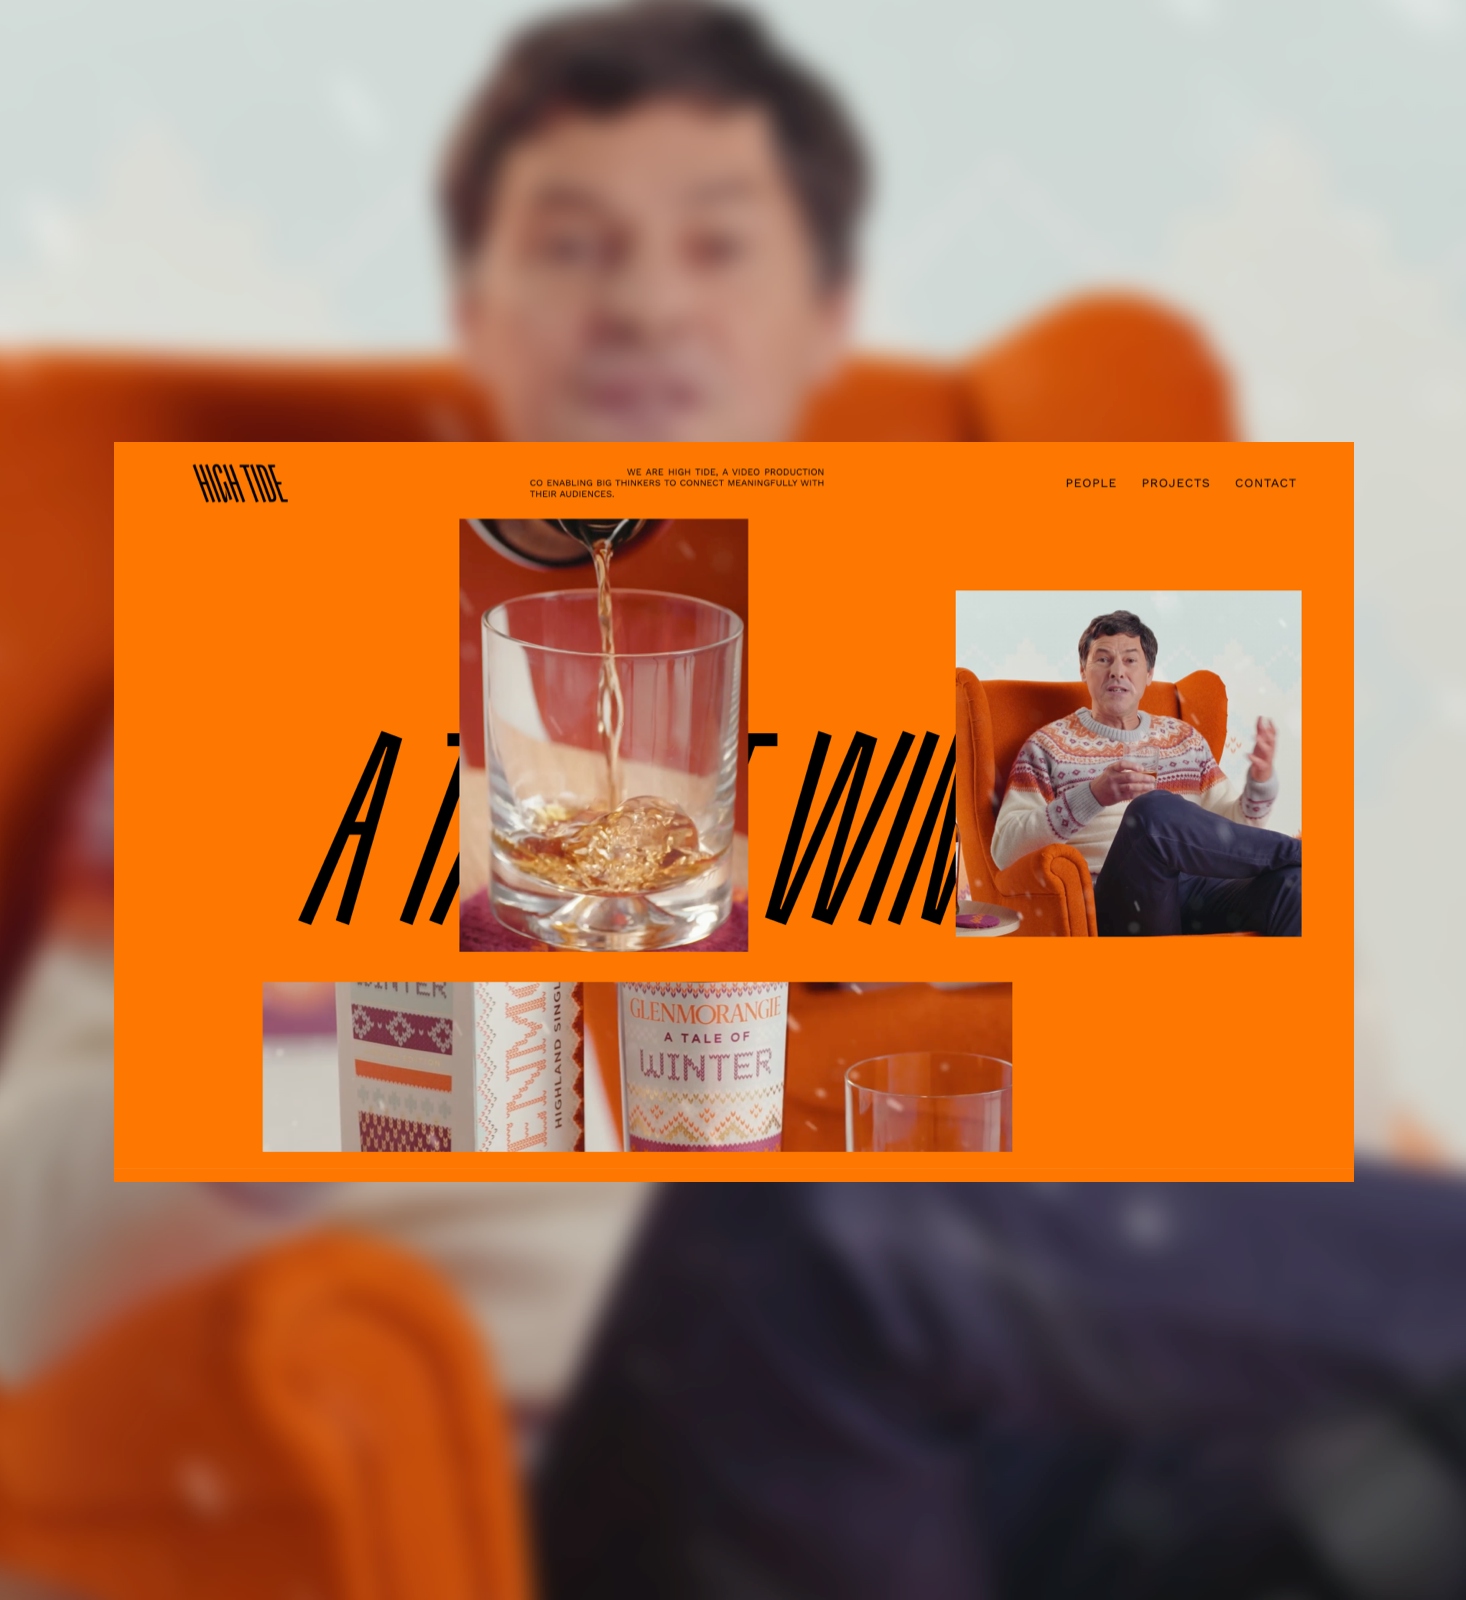 A blurry image of a man sitting on an orange armchair has an orange landscape webpage on it. The webpage has black letters on it and in the left half has a glass of whisky, to the right there is an image of a man sitting on an orange armchair. To the bottom left of the page is a panoramic image of a box of whisky, a bottle and a glass.